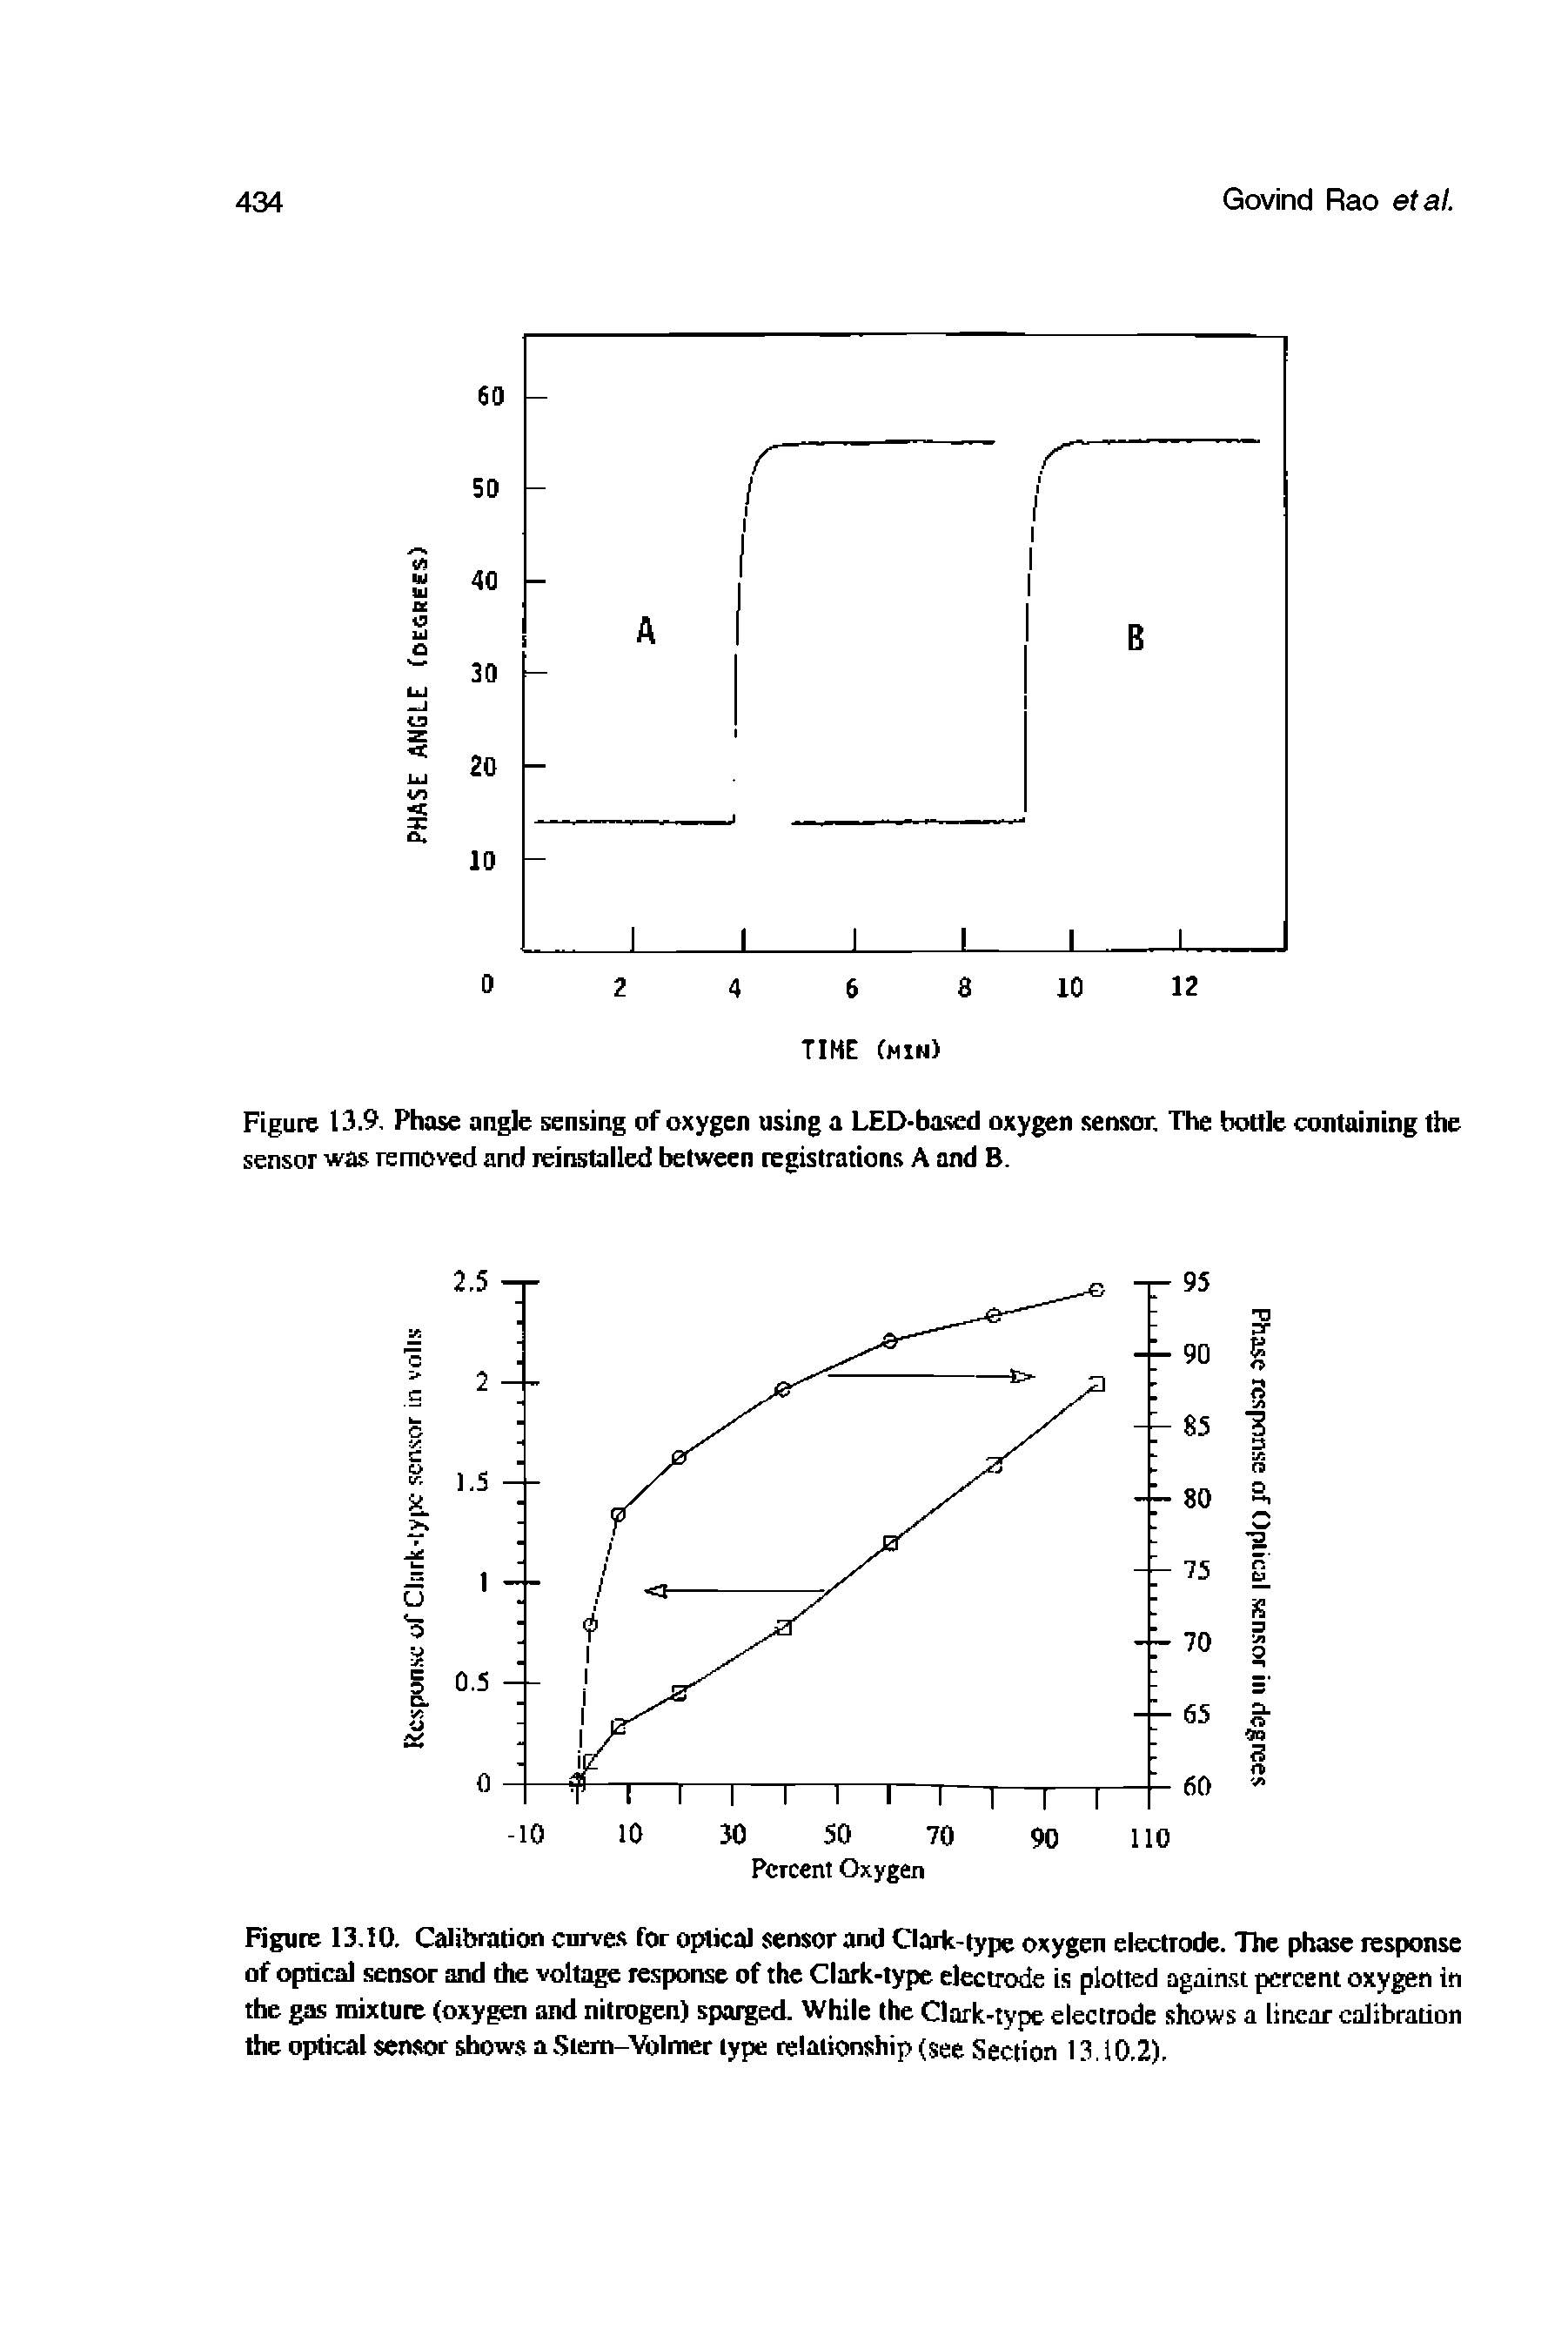 Figure 13.10. Calibration curves for optical sensor and Clark-type oxygen electrode. The phase response of optical sensor and the voltage response of the Clark-type electrode is plotted against percent oxygen in the gas mixture (oxygen and nitrogen) sparged. While the Clark-type electrode shows a linear calibration the optical sensor shows a Siem-Volmer lype relationship (see Section 13.10.2).